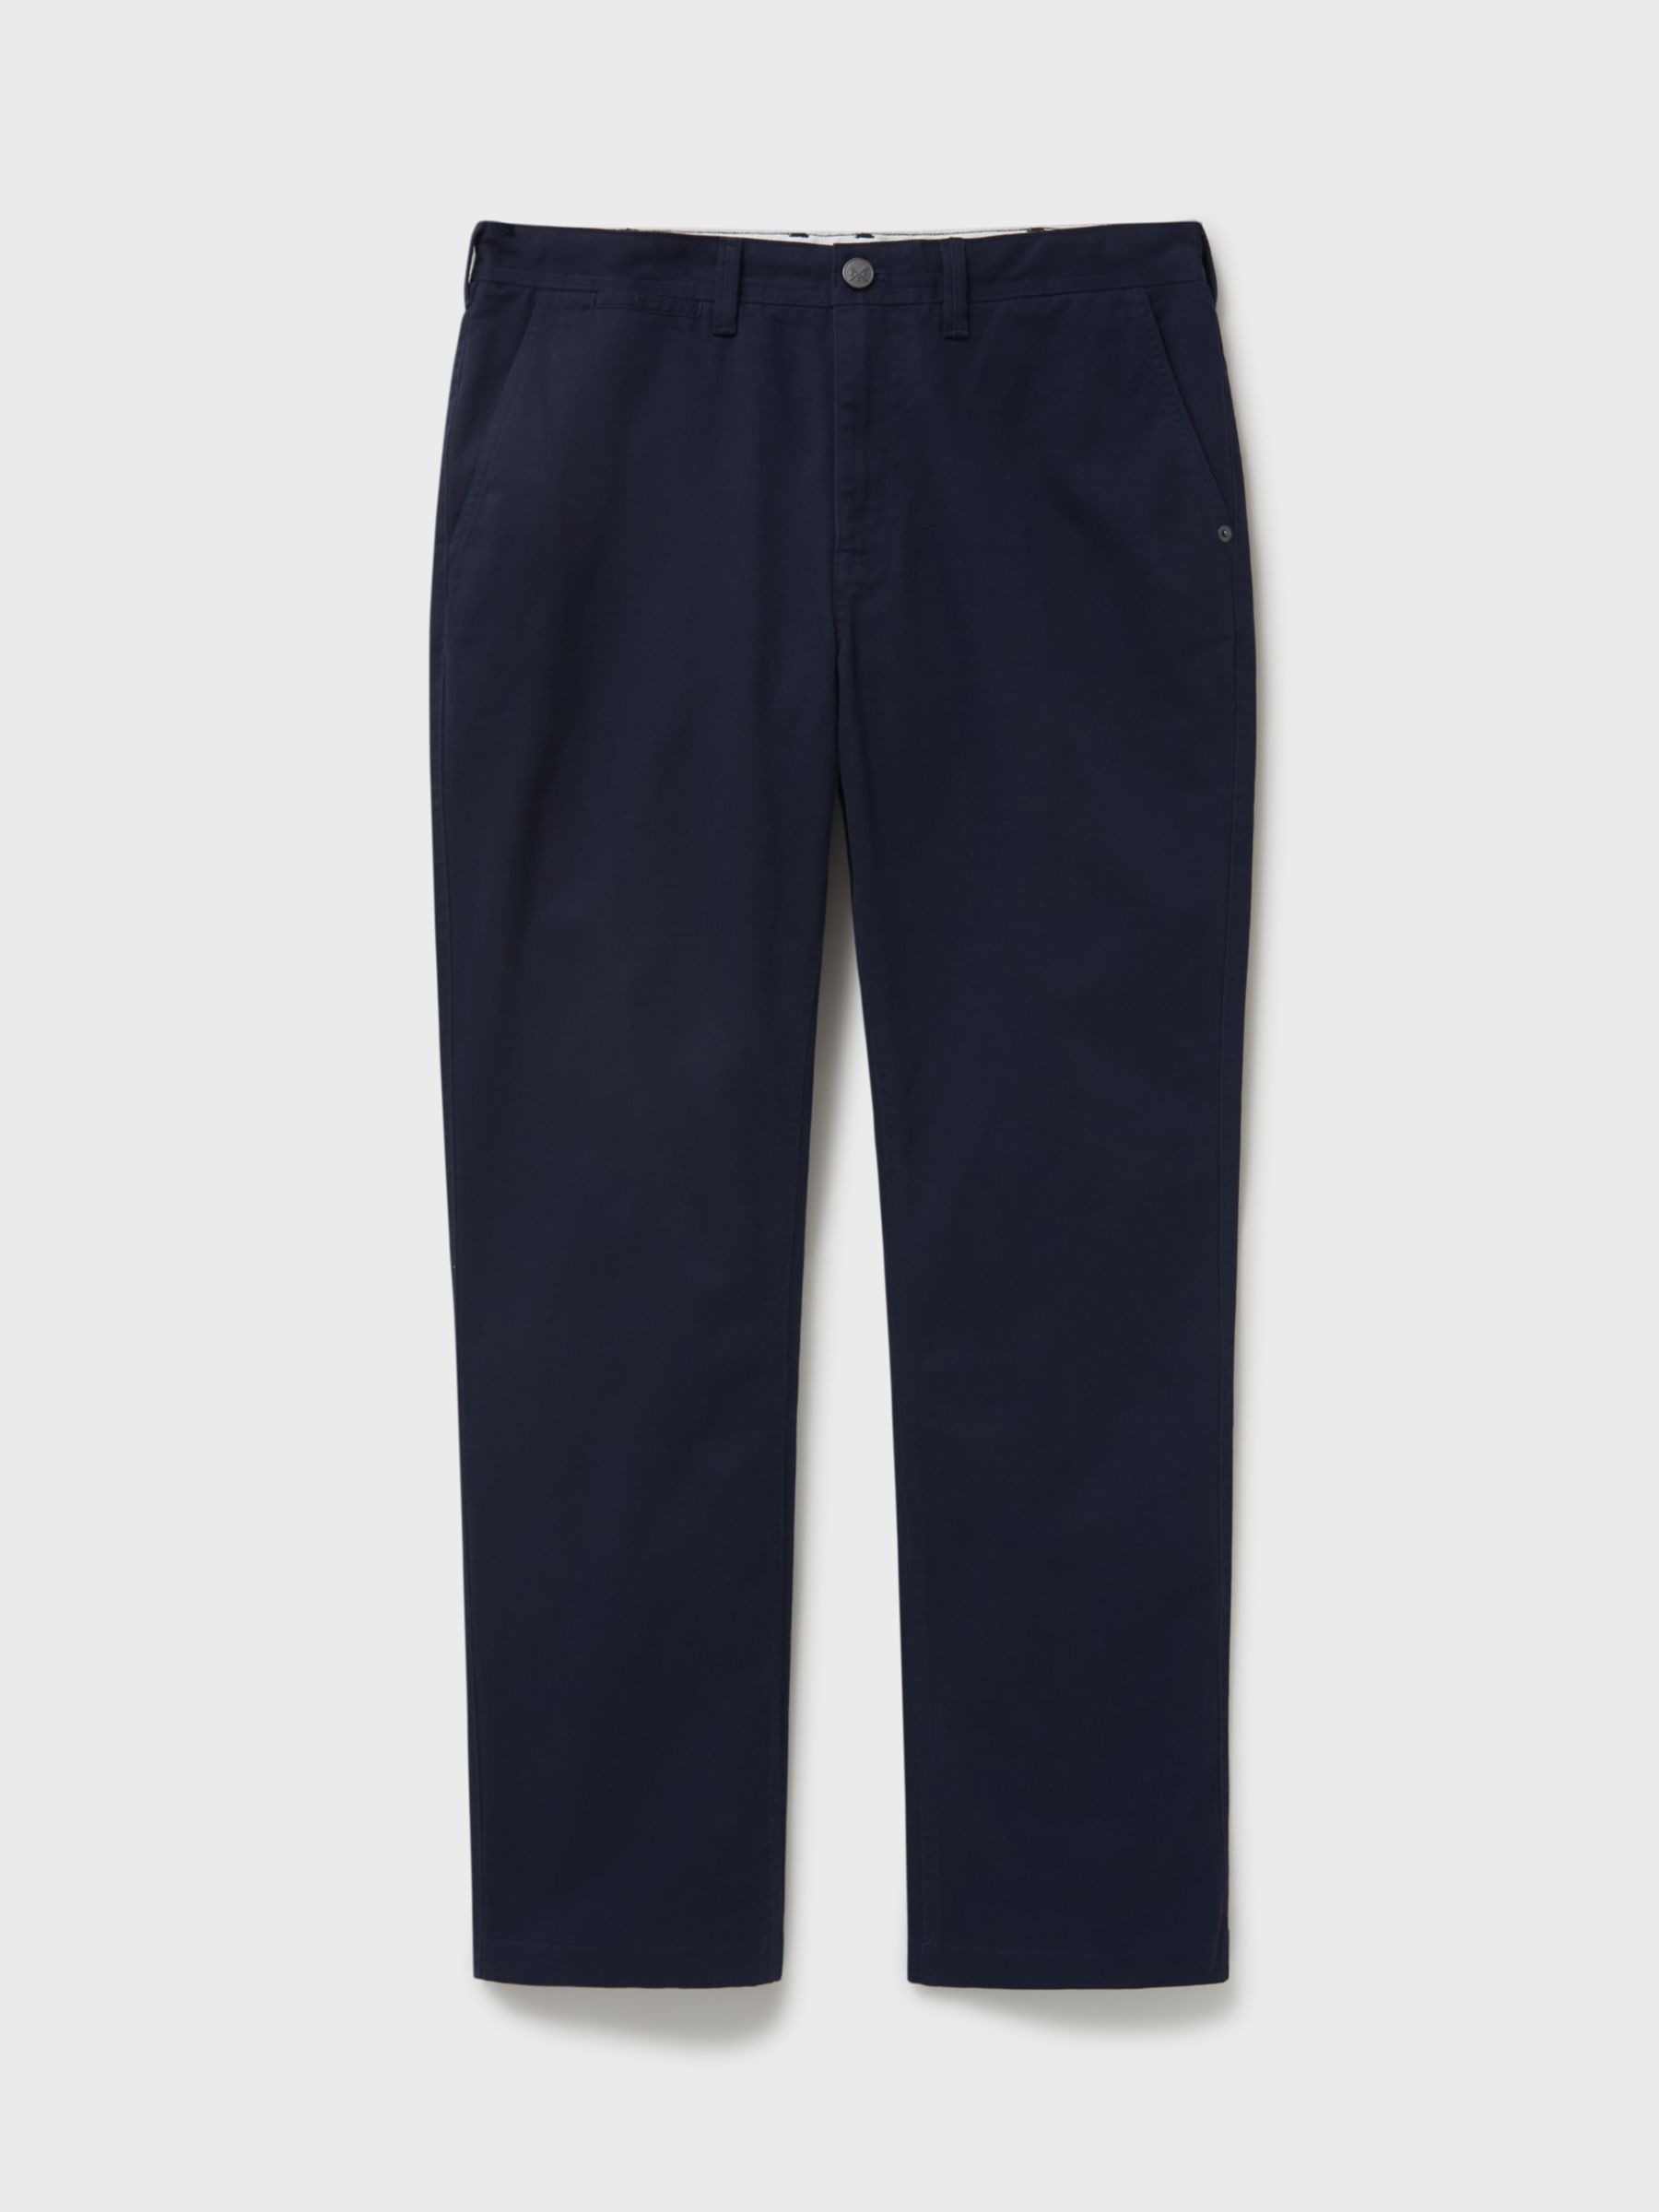 Crew Clothing Cotton Vint Chinos, Navy Blue at John Lewis & Partners